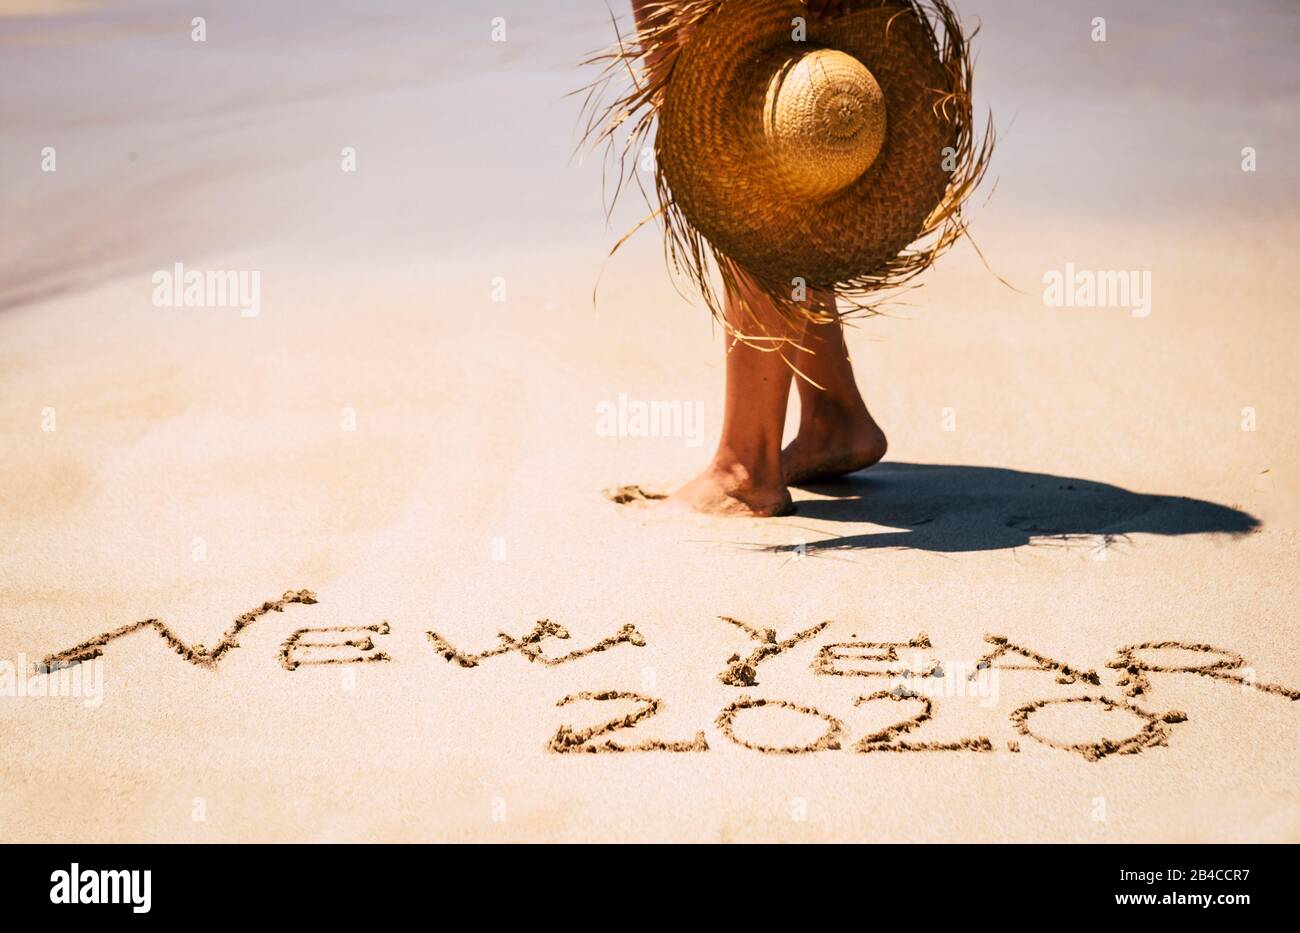 New year eve celebration and start with new life and adventure concept with people in tropical beach under a nice sun enjoying the lifestyle and be happy Stock Photo